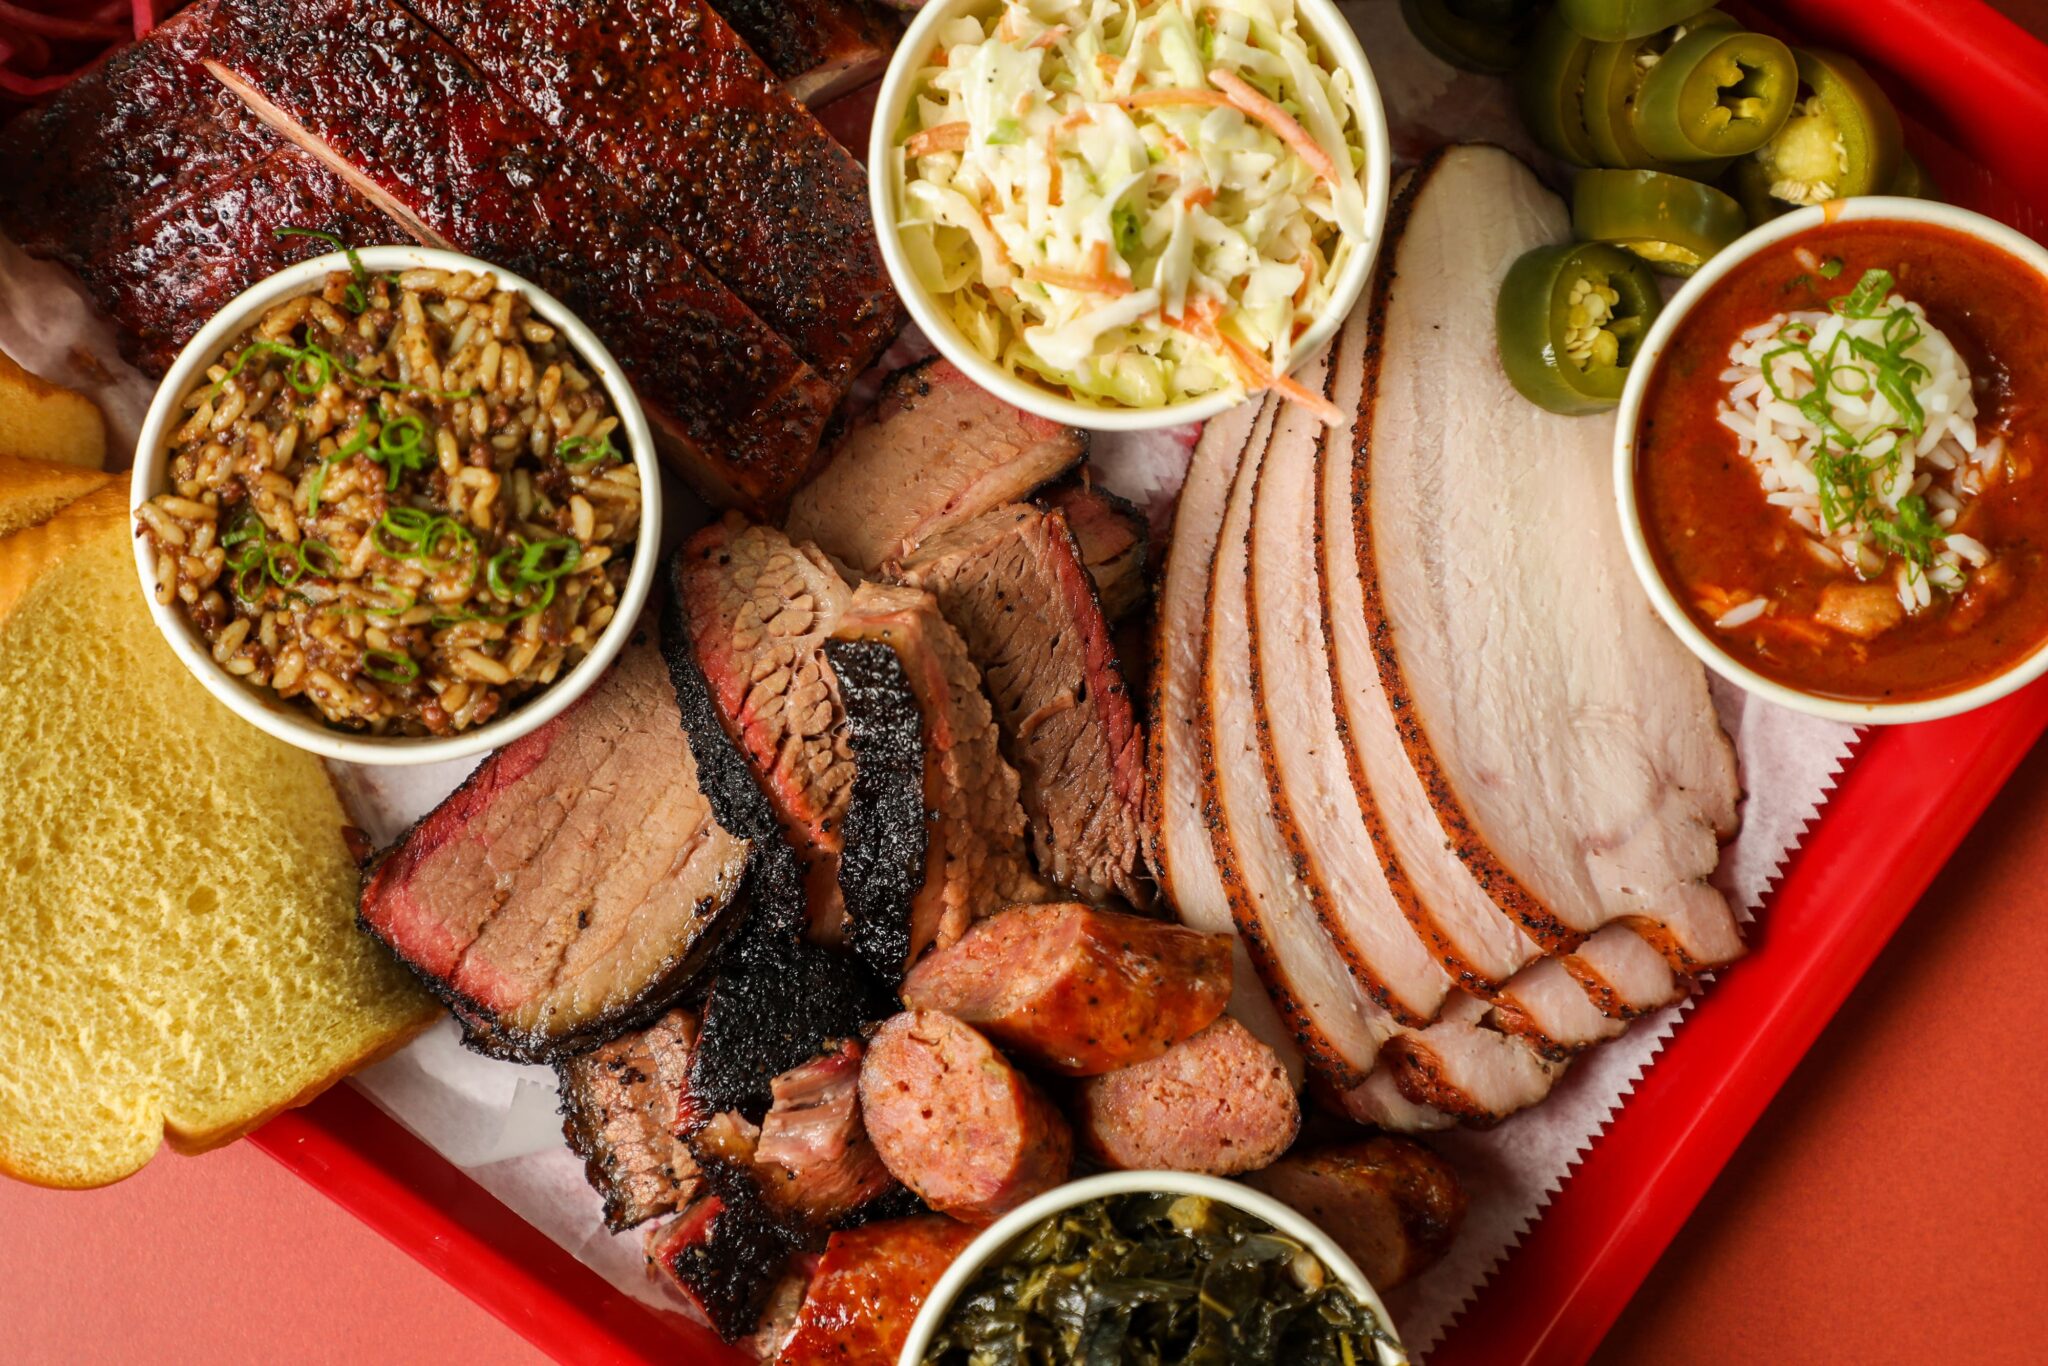 Platter of meats and sides from Devil Moon BBQ located in NOLA